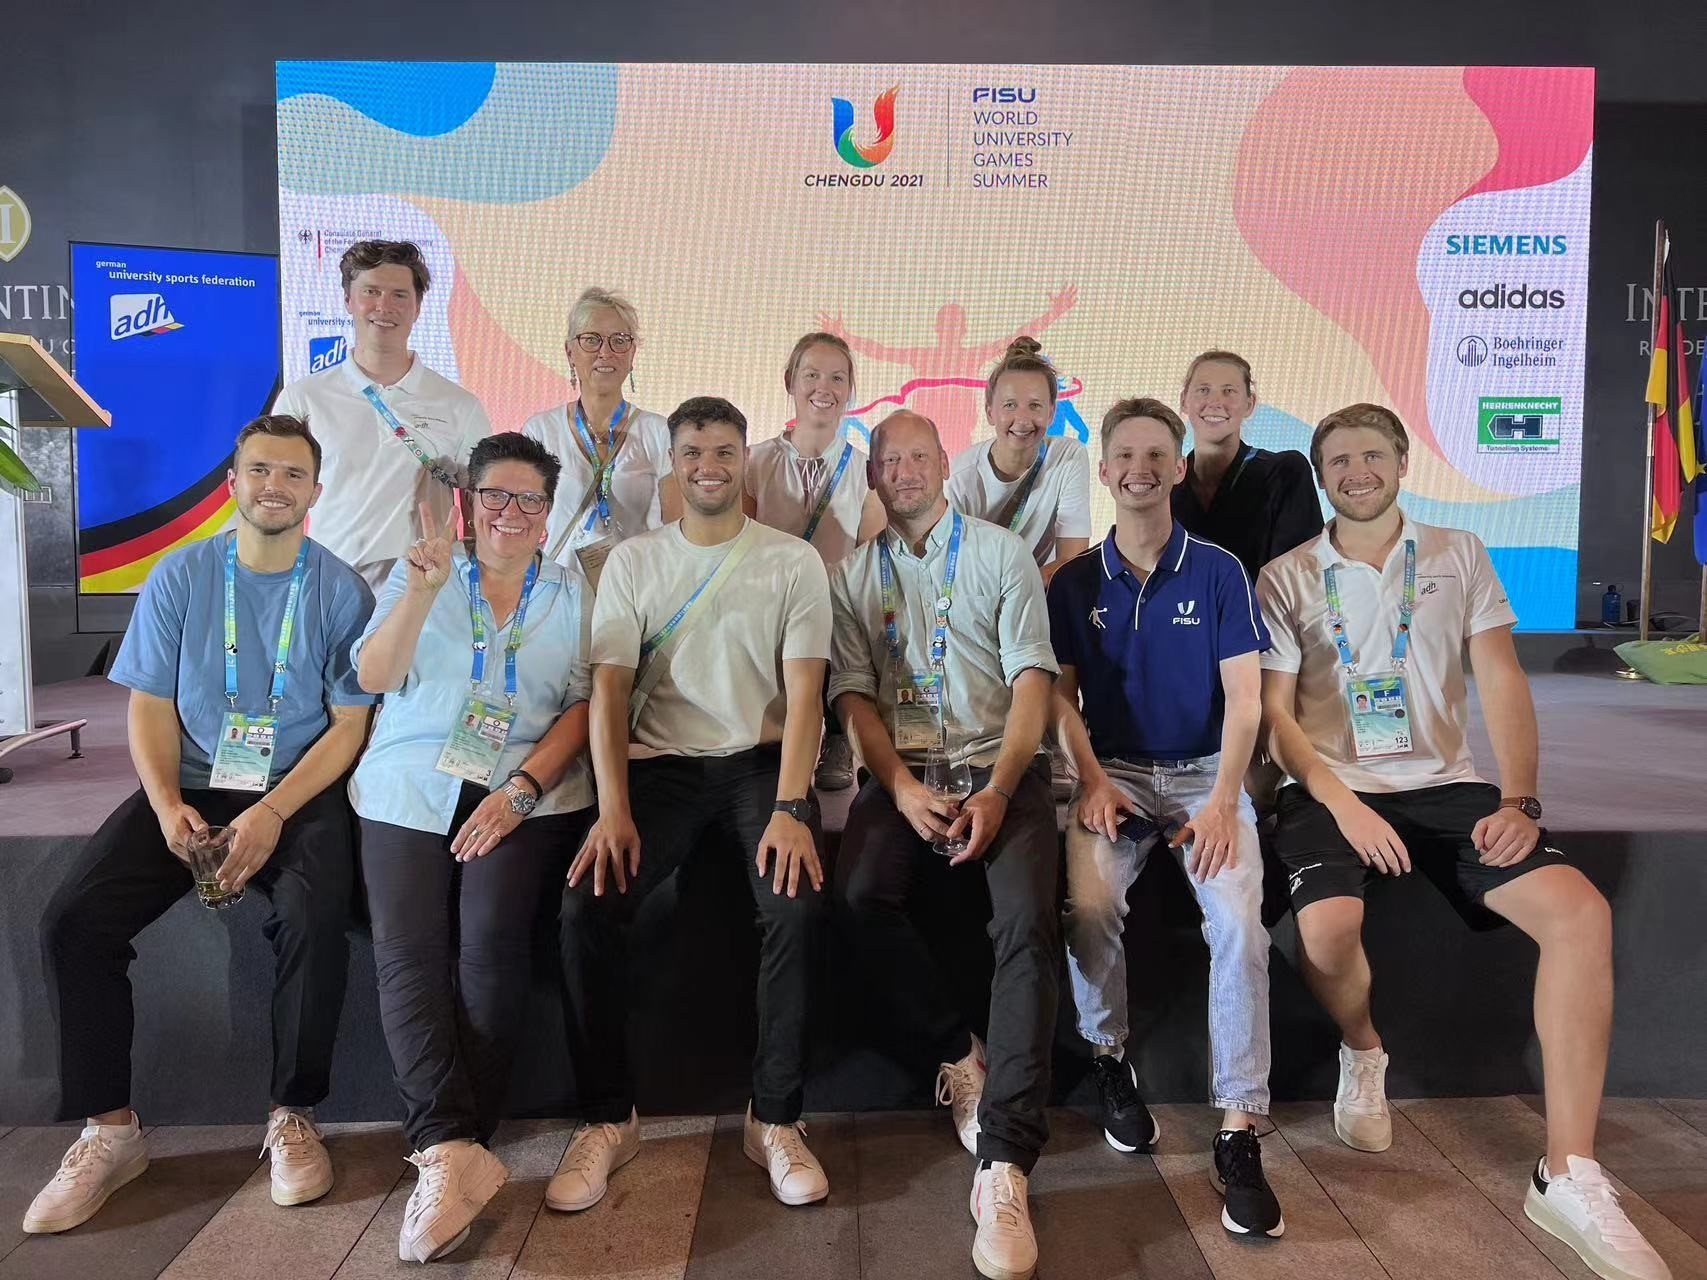 Rhine-Ruhr in Germany is preparing to host the next edition of the FISU Summer World University Games after Chengdu ©FISU